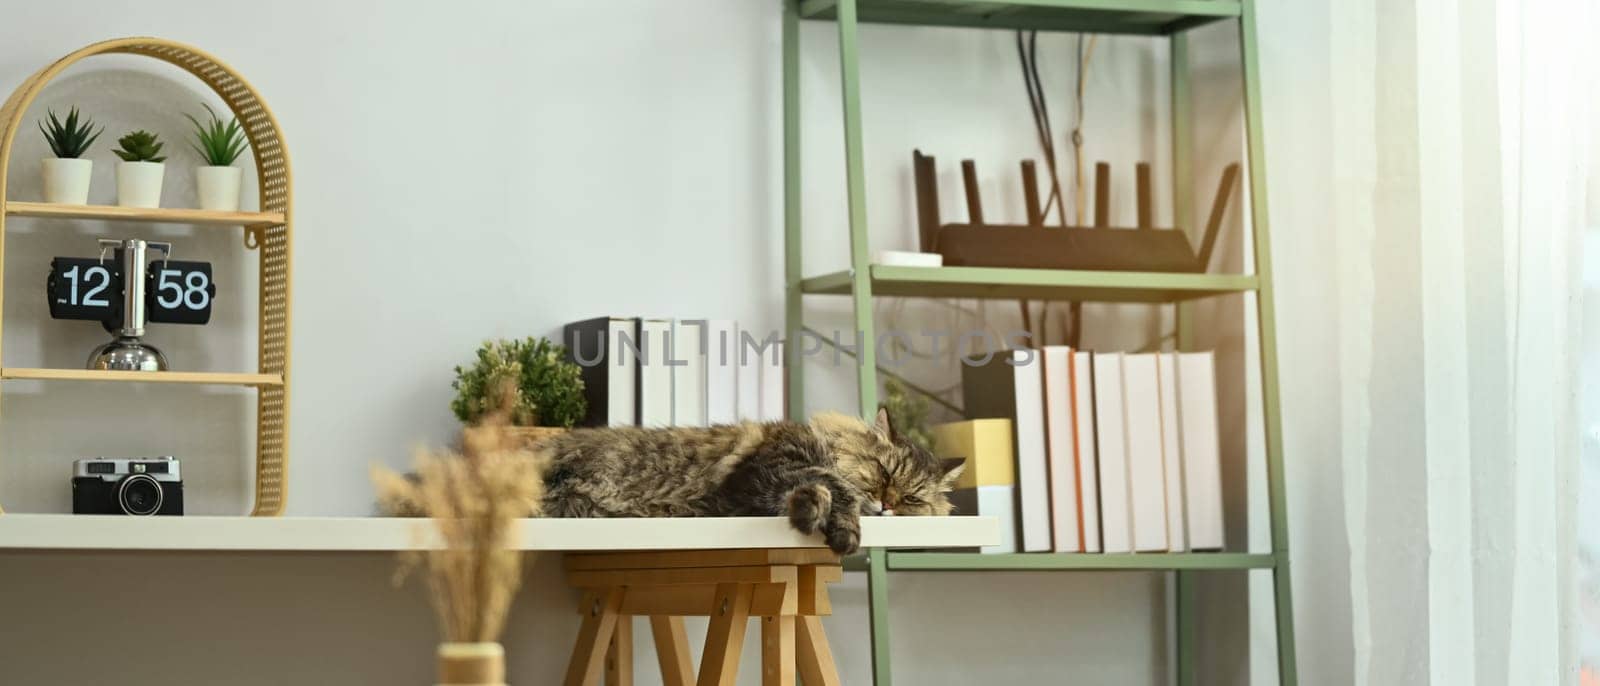 Fluffy cat sleeping on white table near curtains in cozy living room. Domestic cat concept.